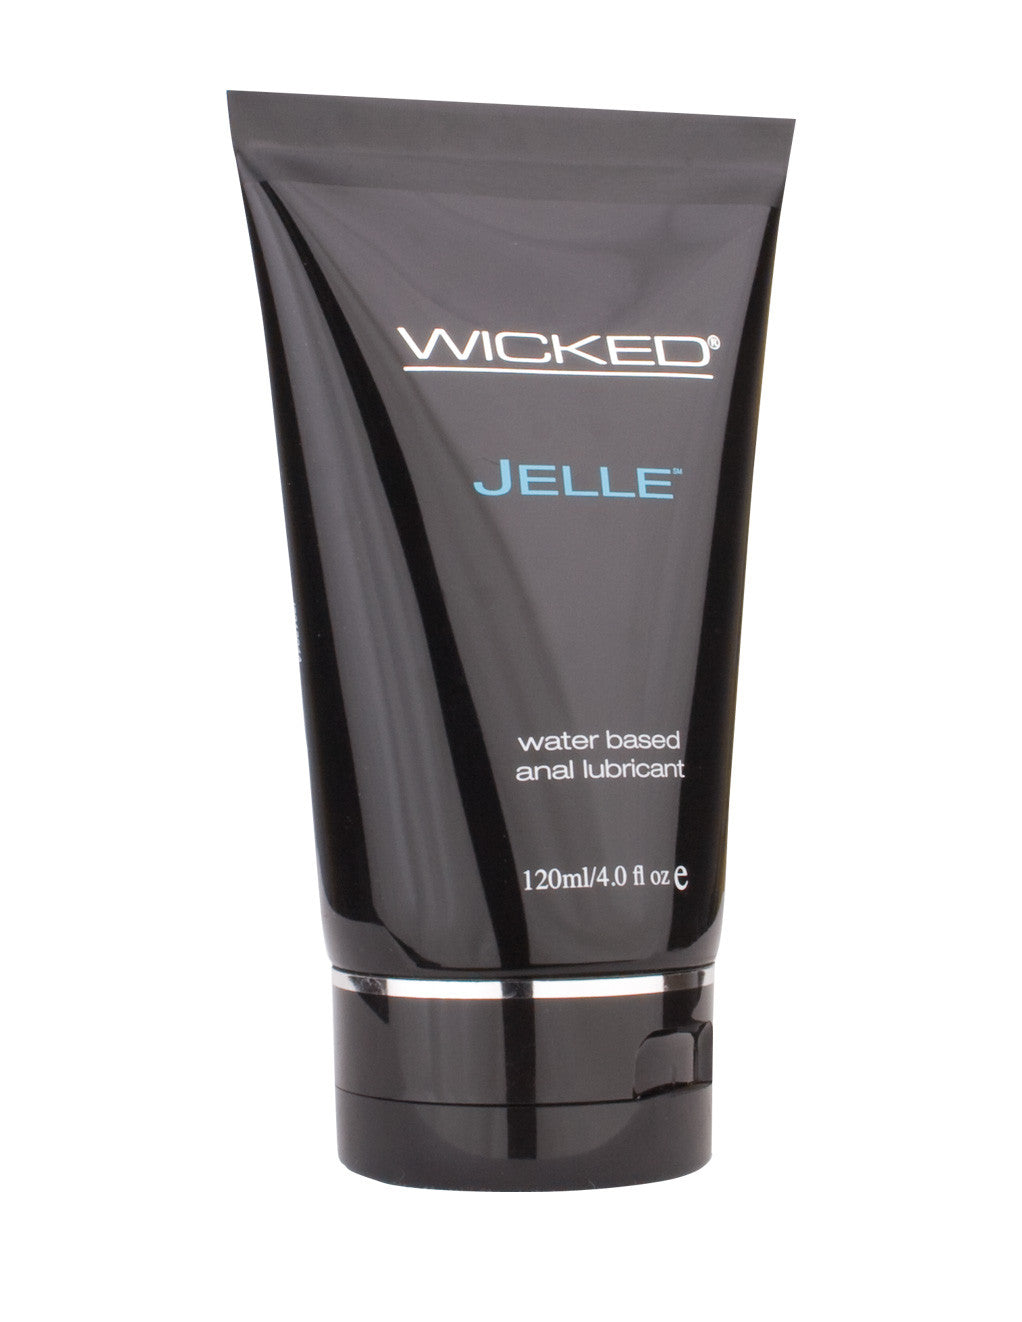 Wicked Jelle Water-based Anal Lubricant